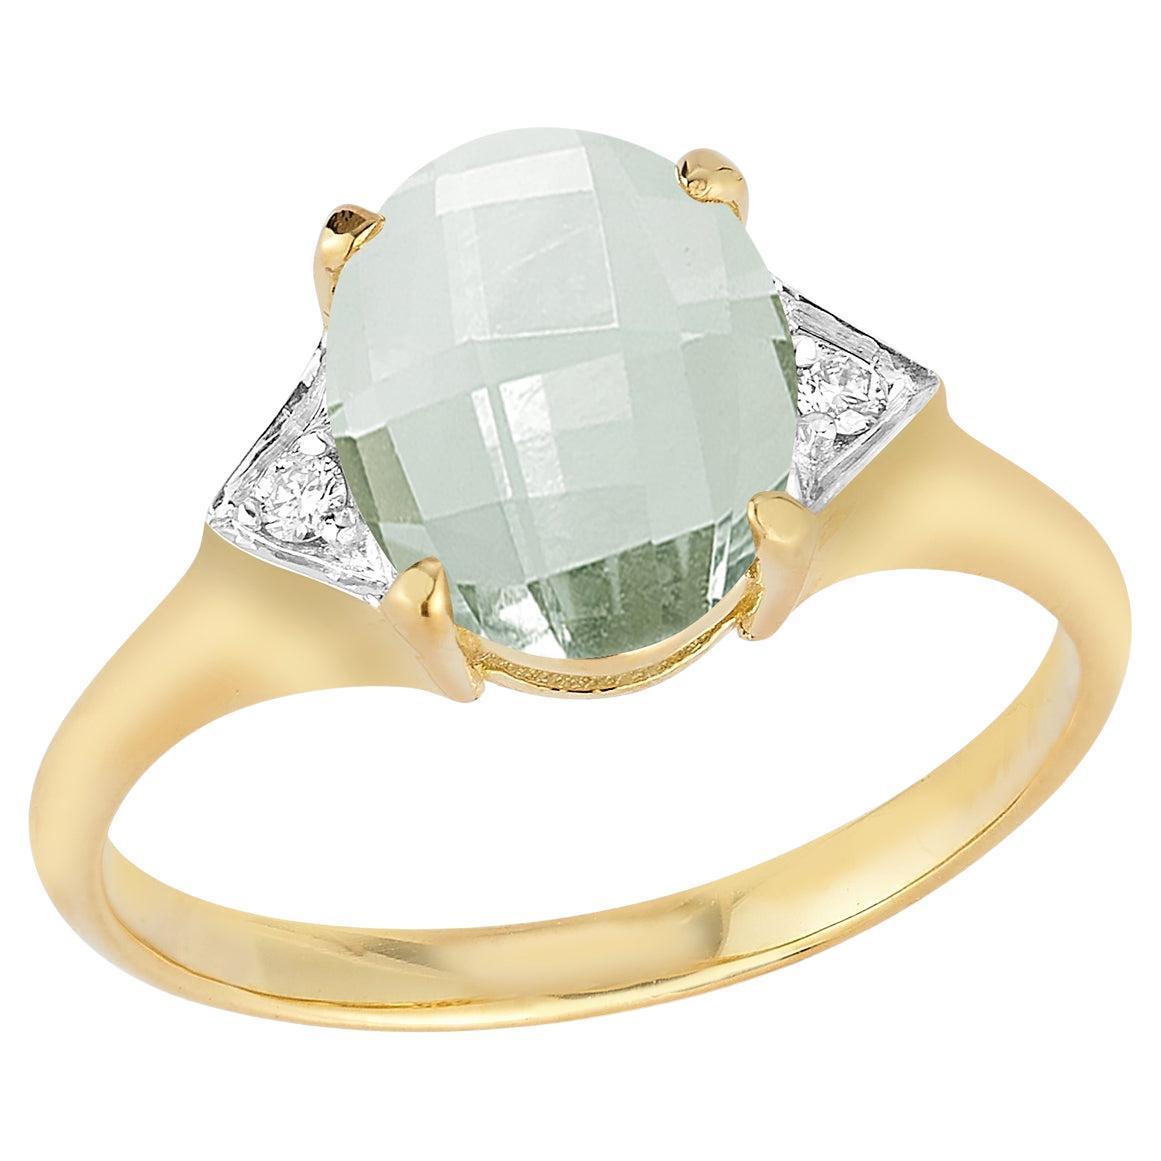 For Sale:  Hand-Crafted 14K Gold 0.05 ct. tw. Diamond & 5.25CT Green Amethyst Cocktail Ring